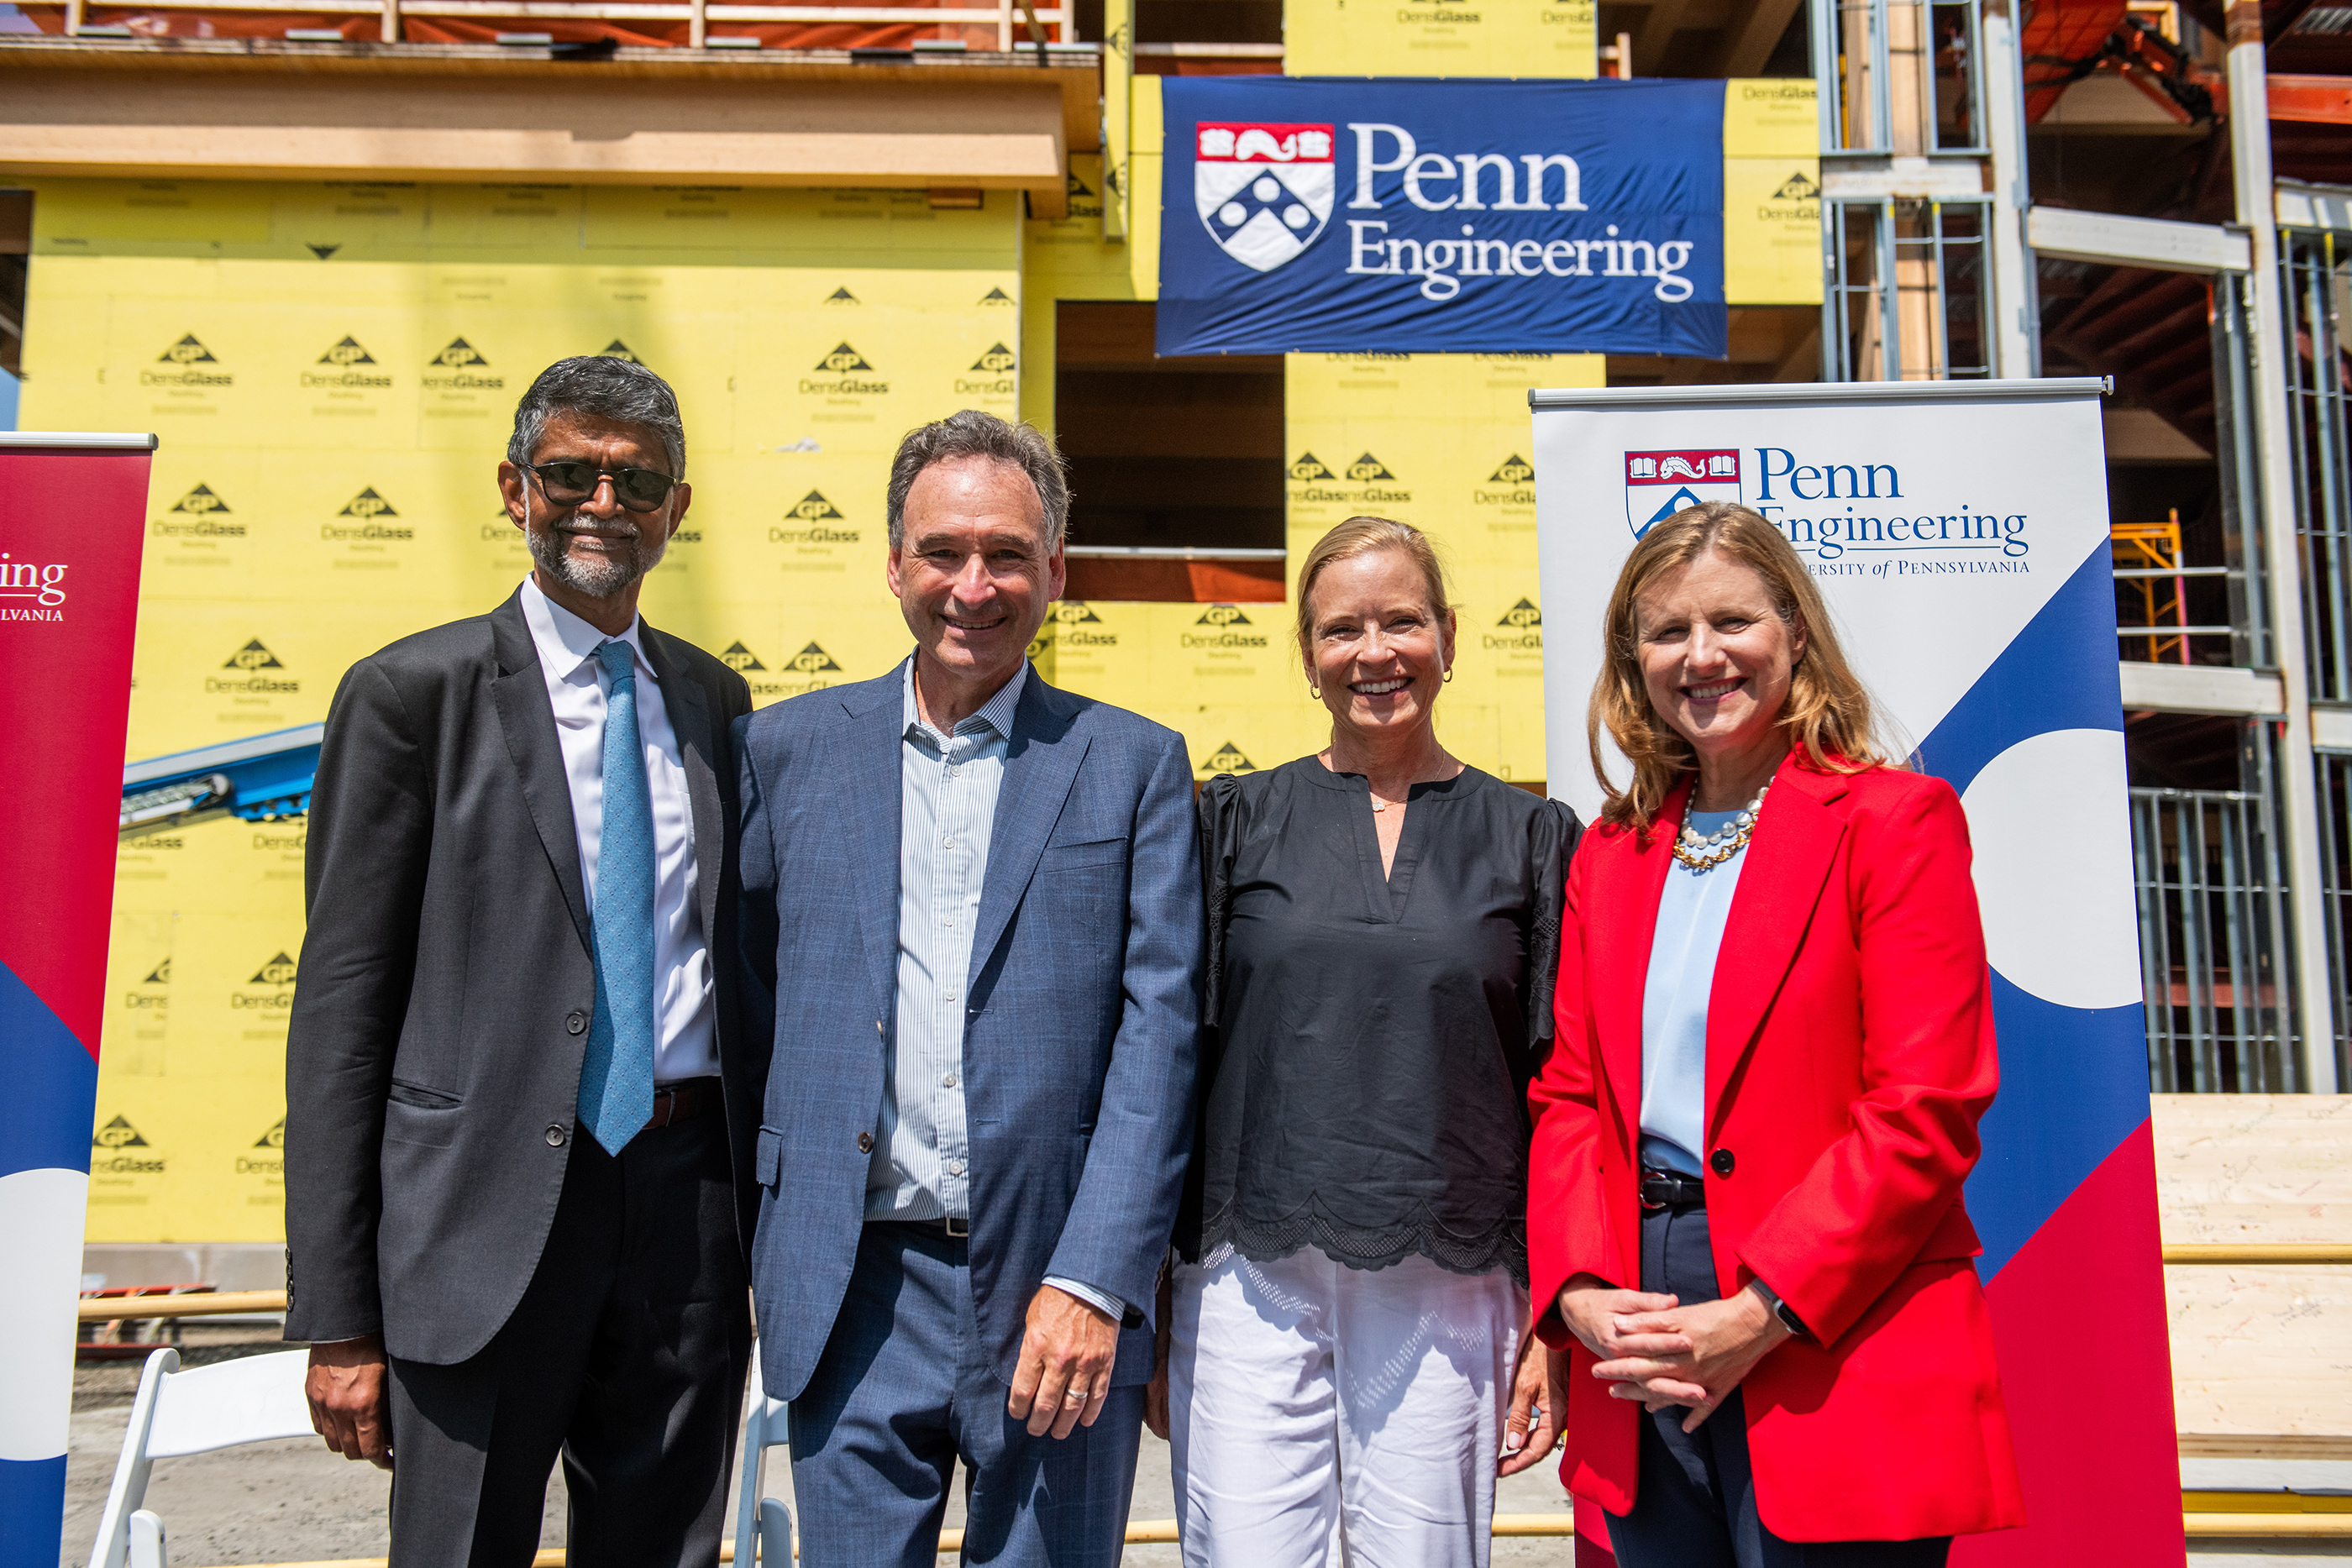 Kumar, Stone, Stone, and Magill smile for a photo in front of AG Hall with Penn Engineering sign in background